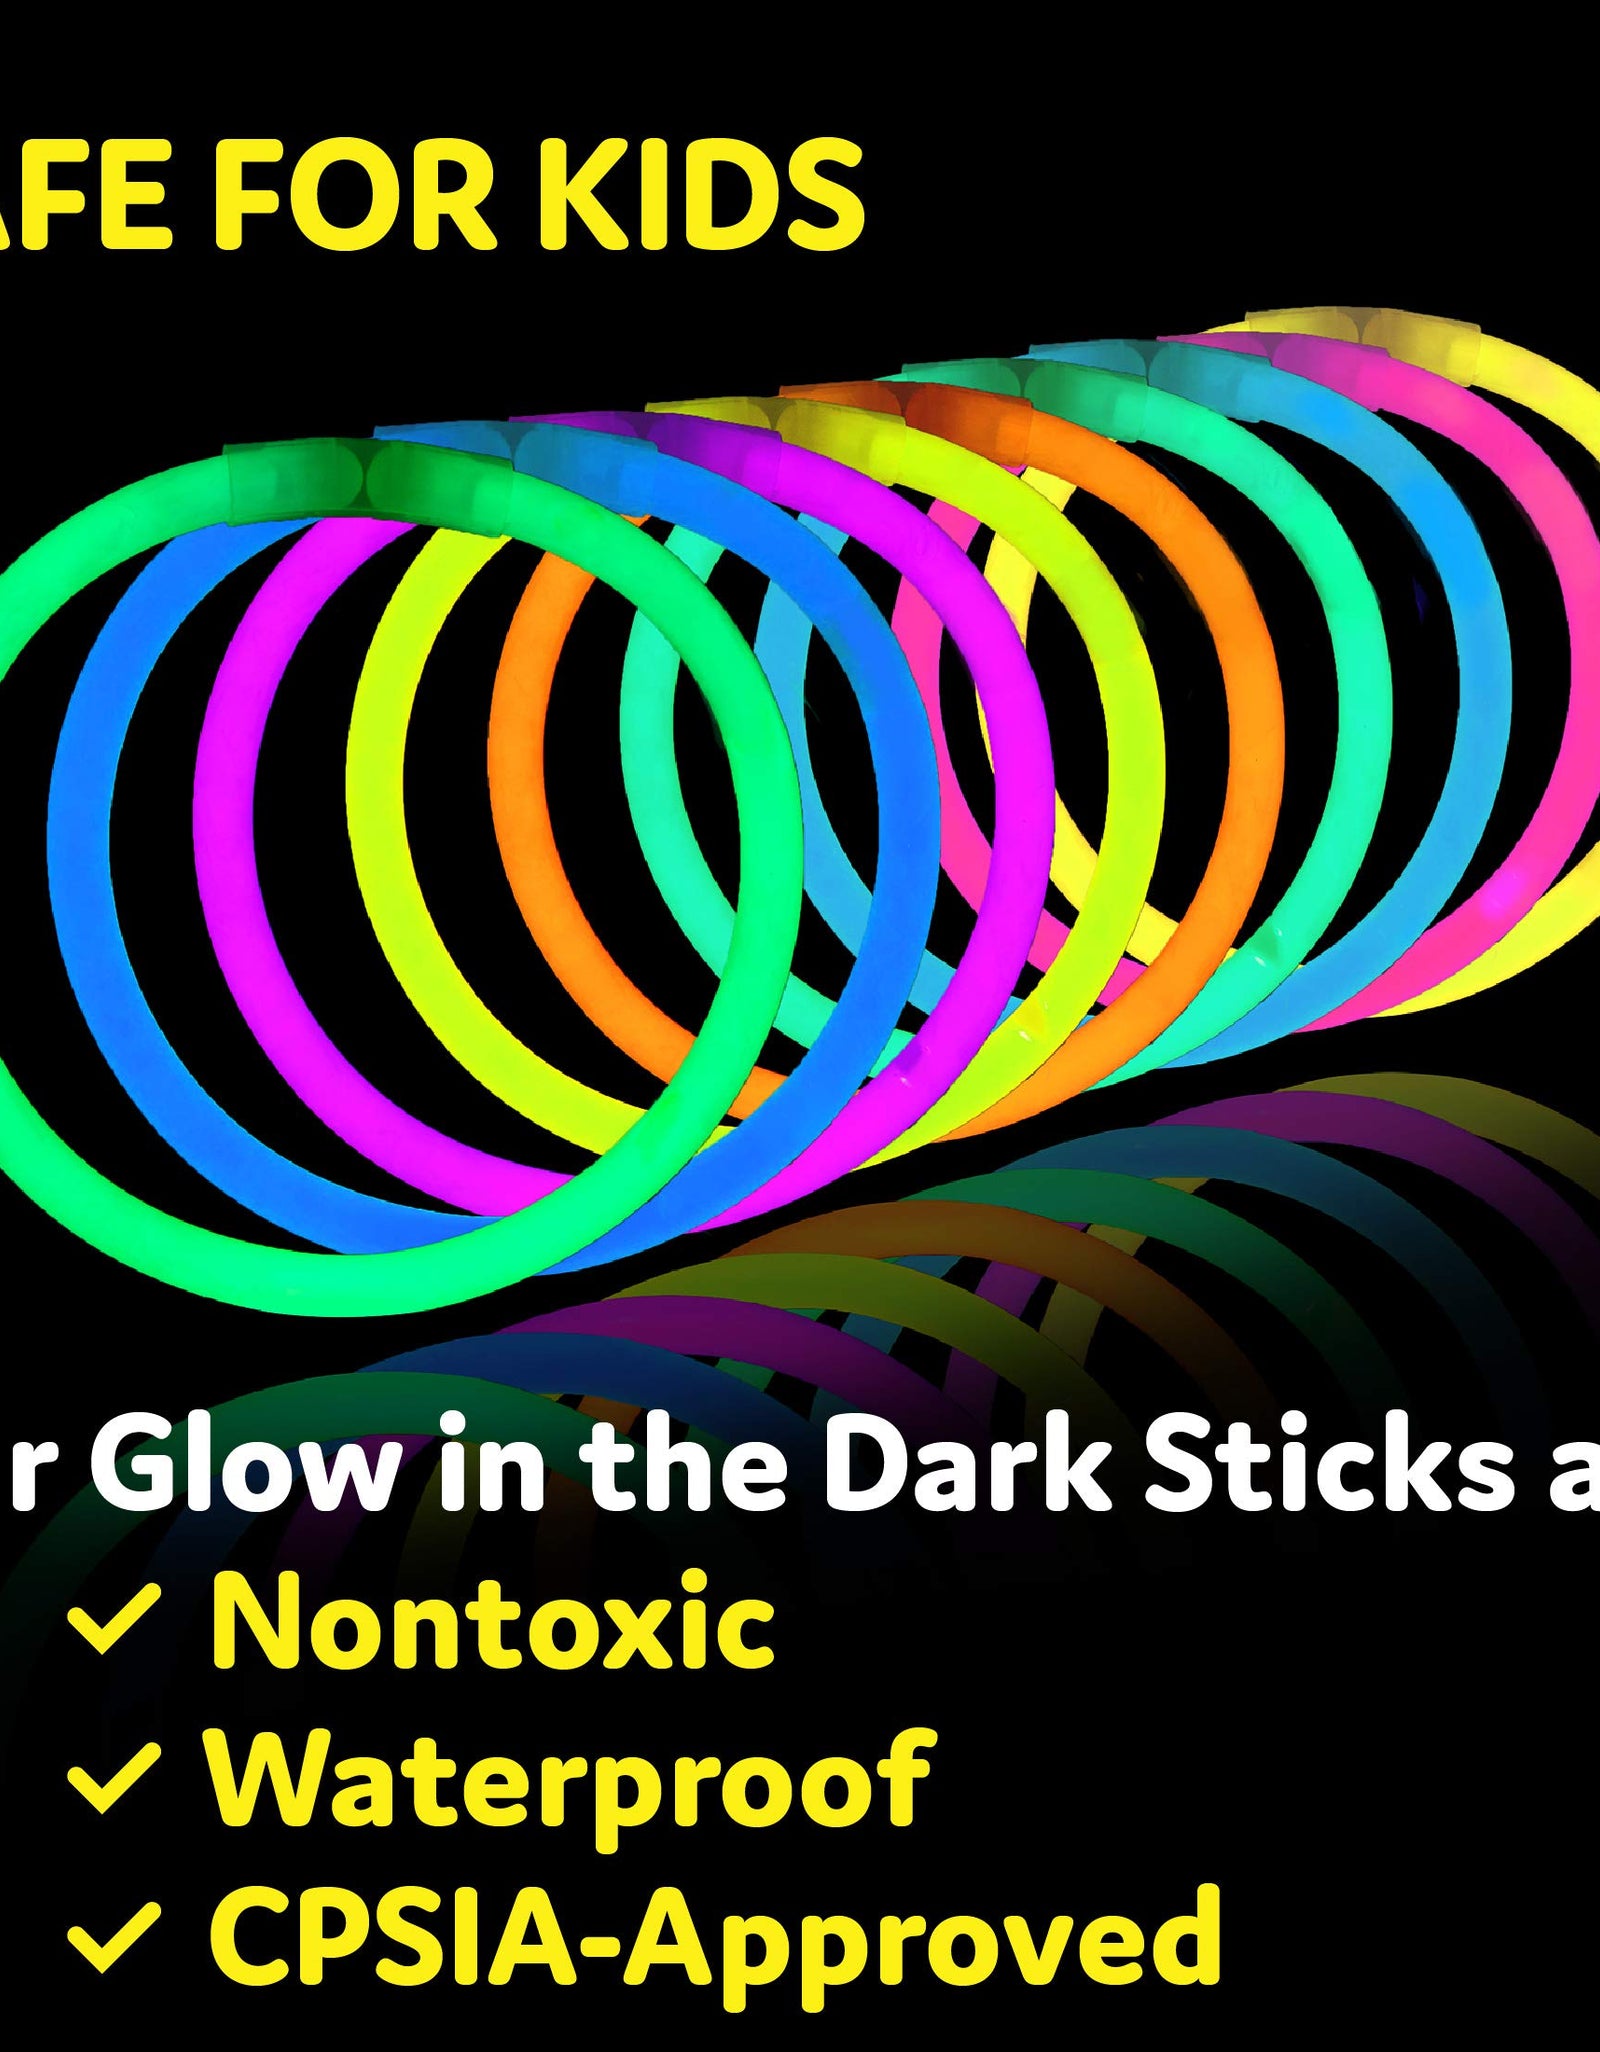 PartySticks Glow Sticks Party Supplies 100pk - 8 Inch Glow in the Dark Light Up Sticks Party Favors, Glow Party Decorations, Neon Party Glow Necklaces and Glow Bracelets with Connectors